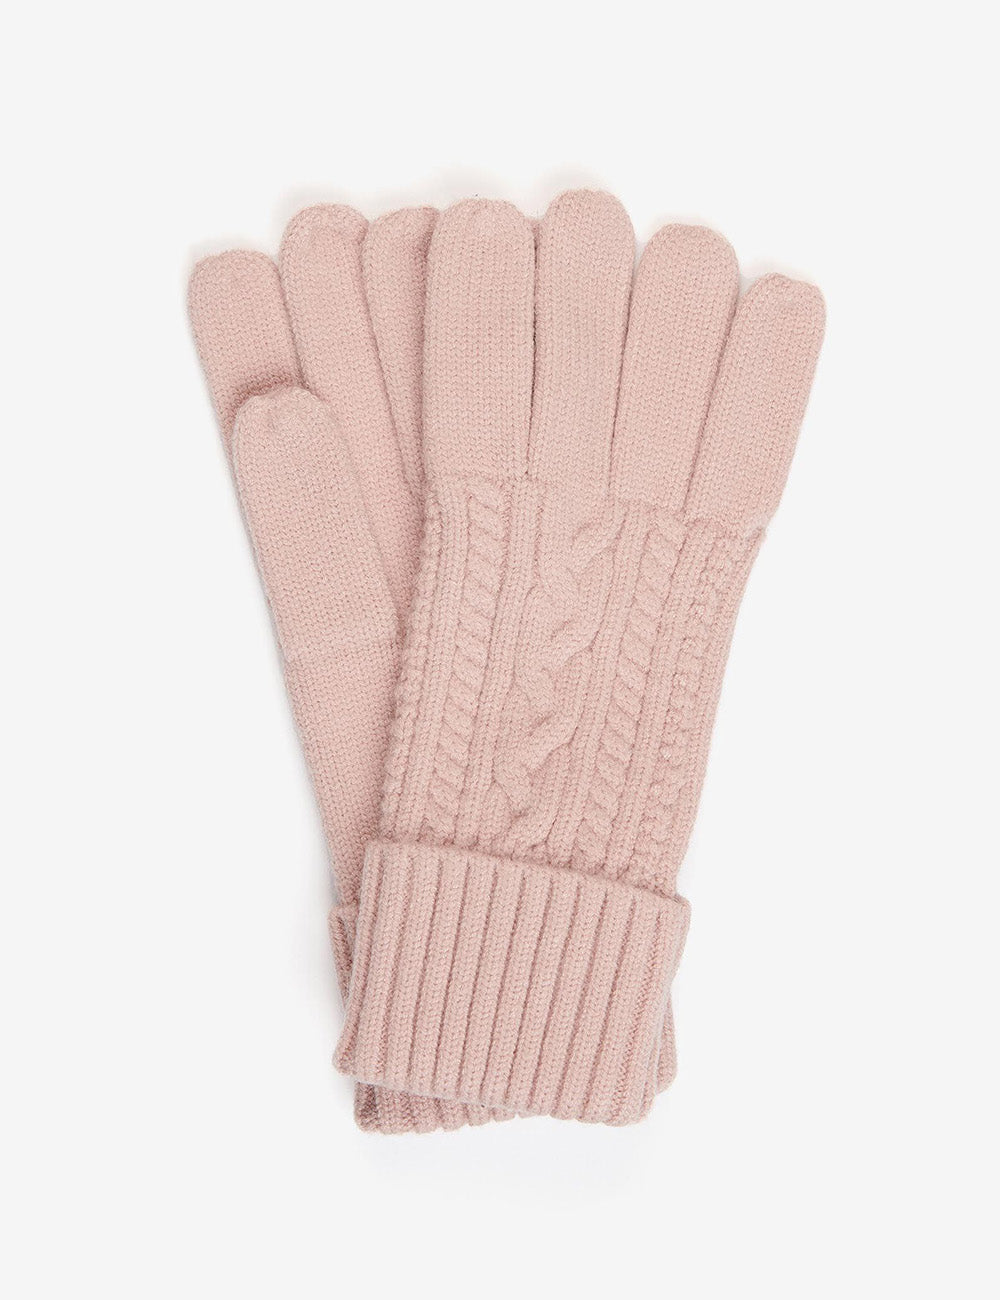 Barbour Alnwick Knitted Gloves - Rose Pink